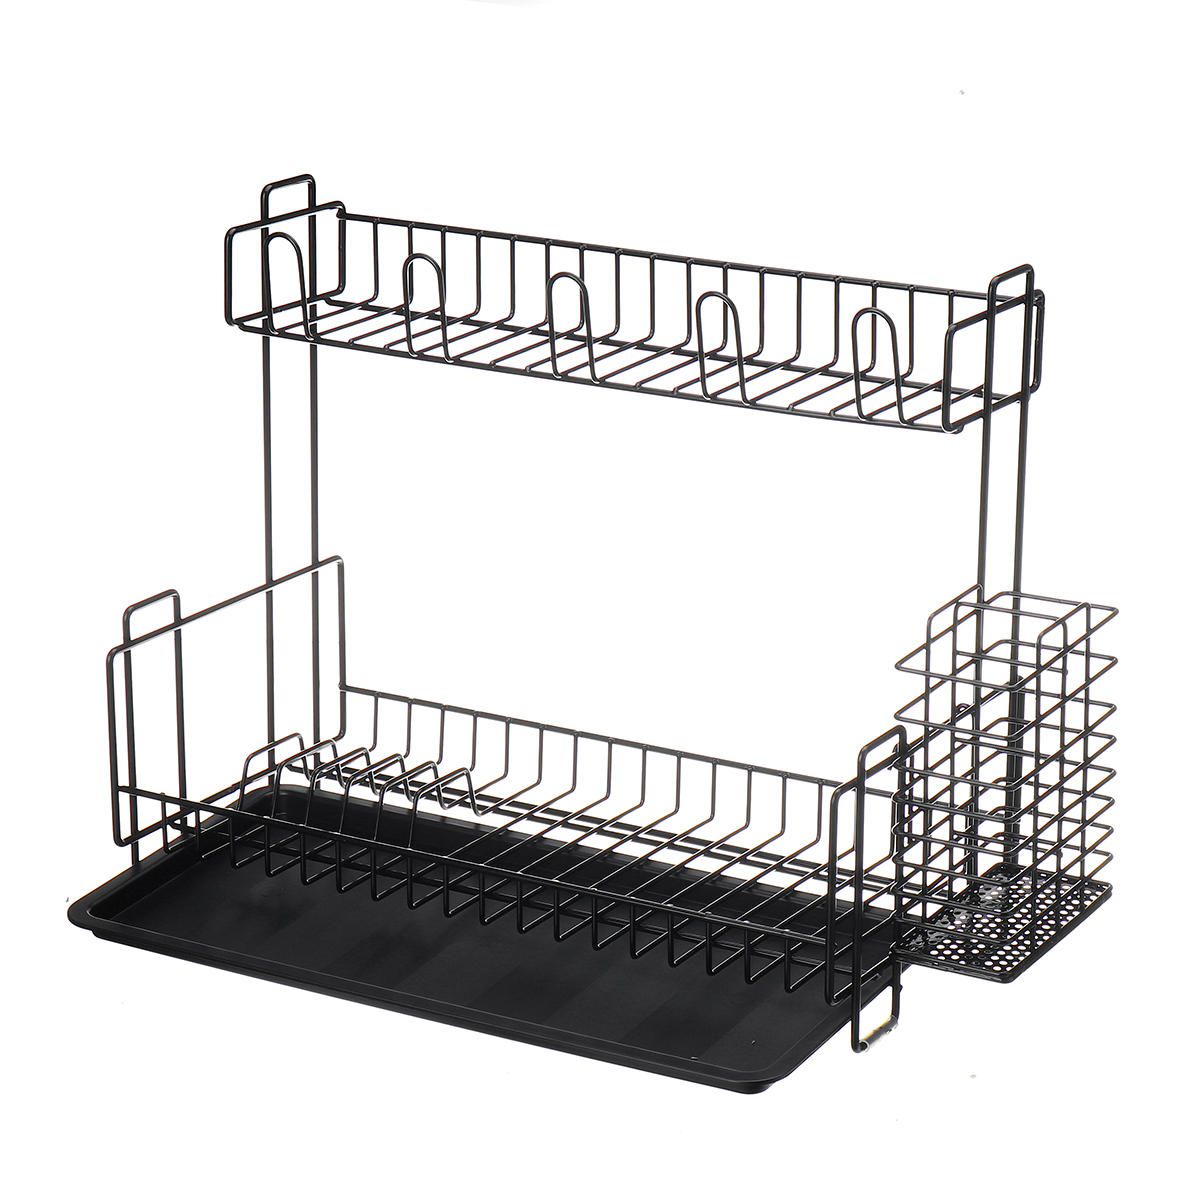 Image of Dish Drainer Kitchen Drying Drain Shelf Sink Holder Cup Bowl Storage Home Basket Stand